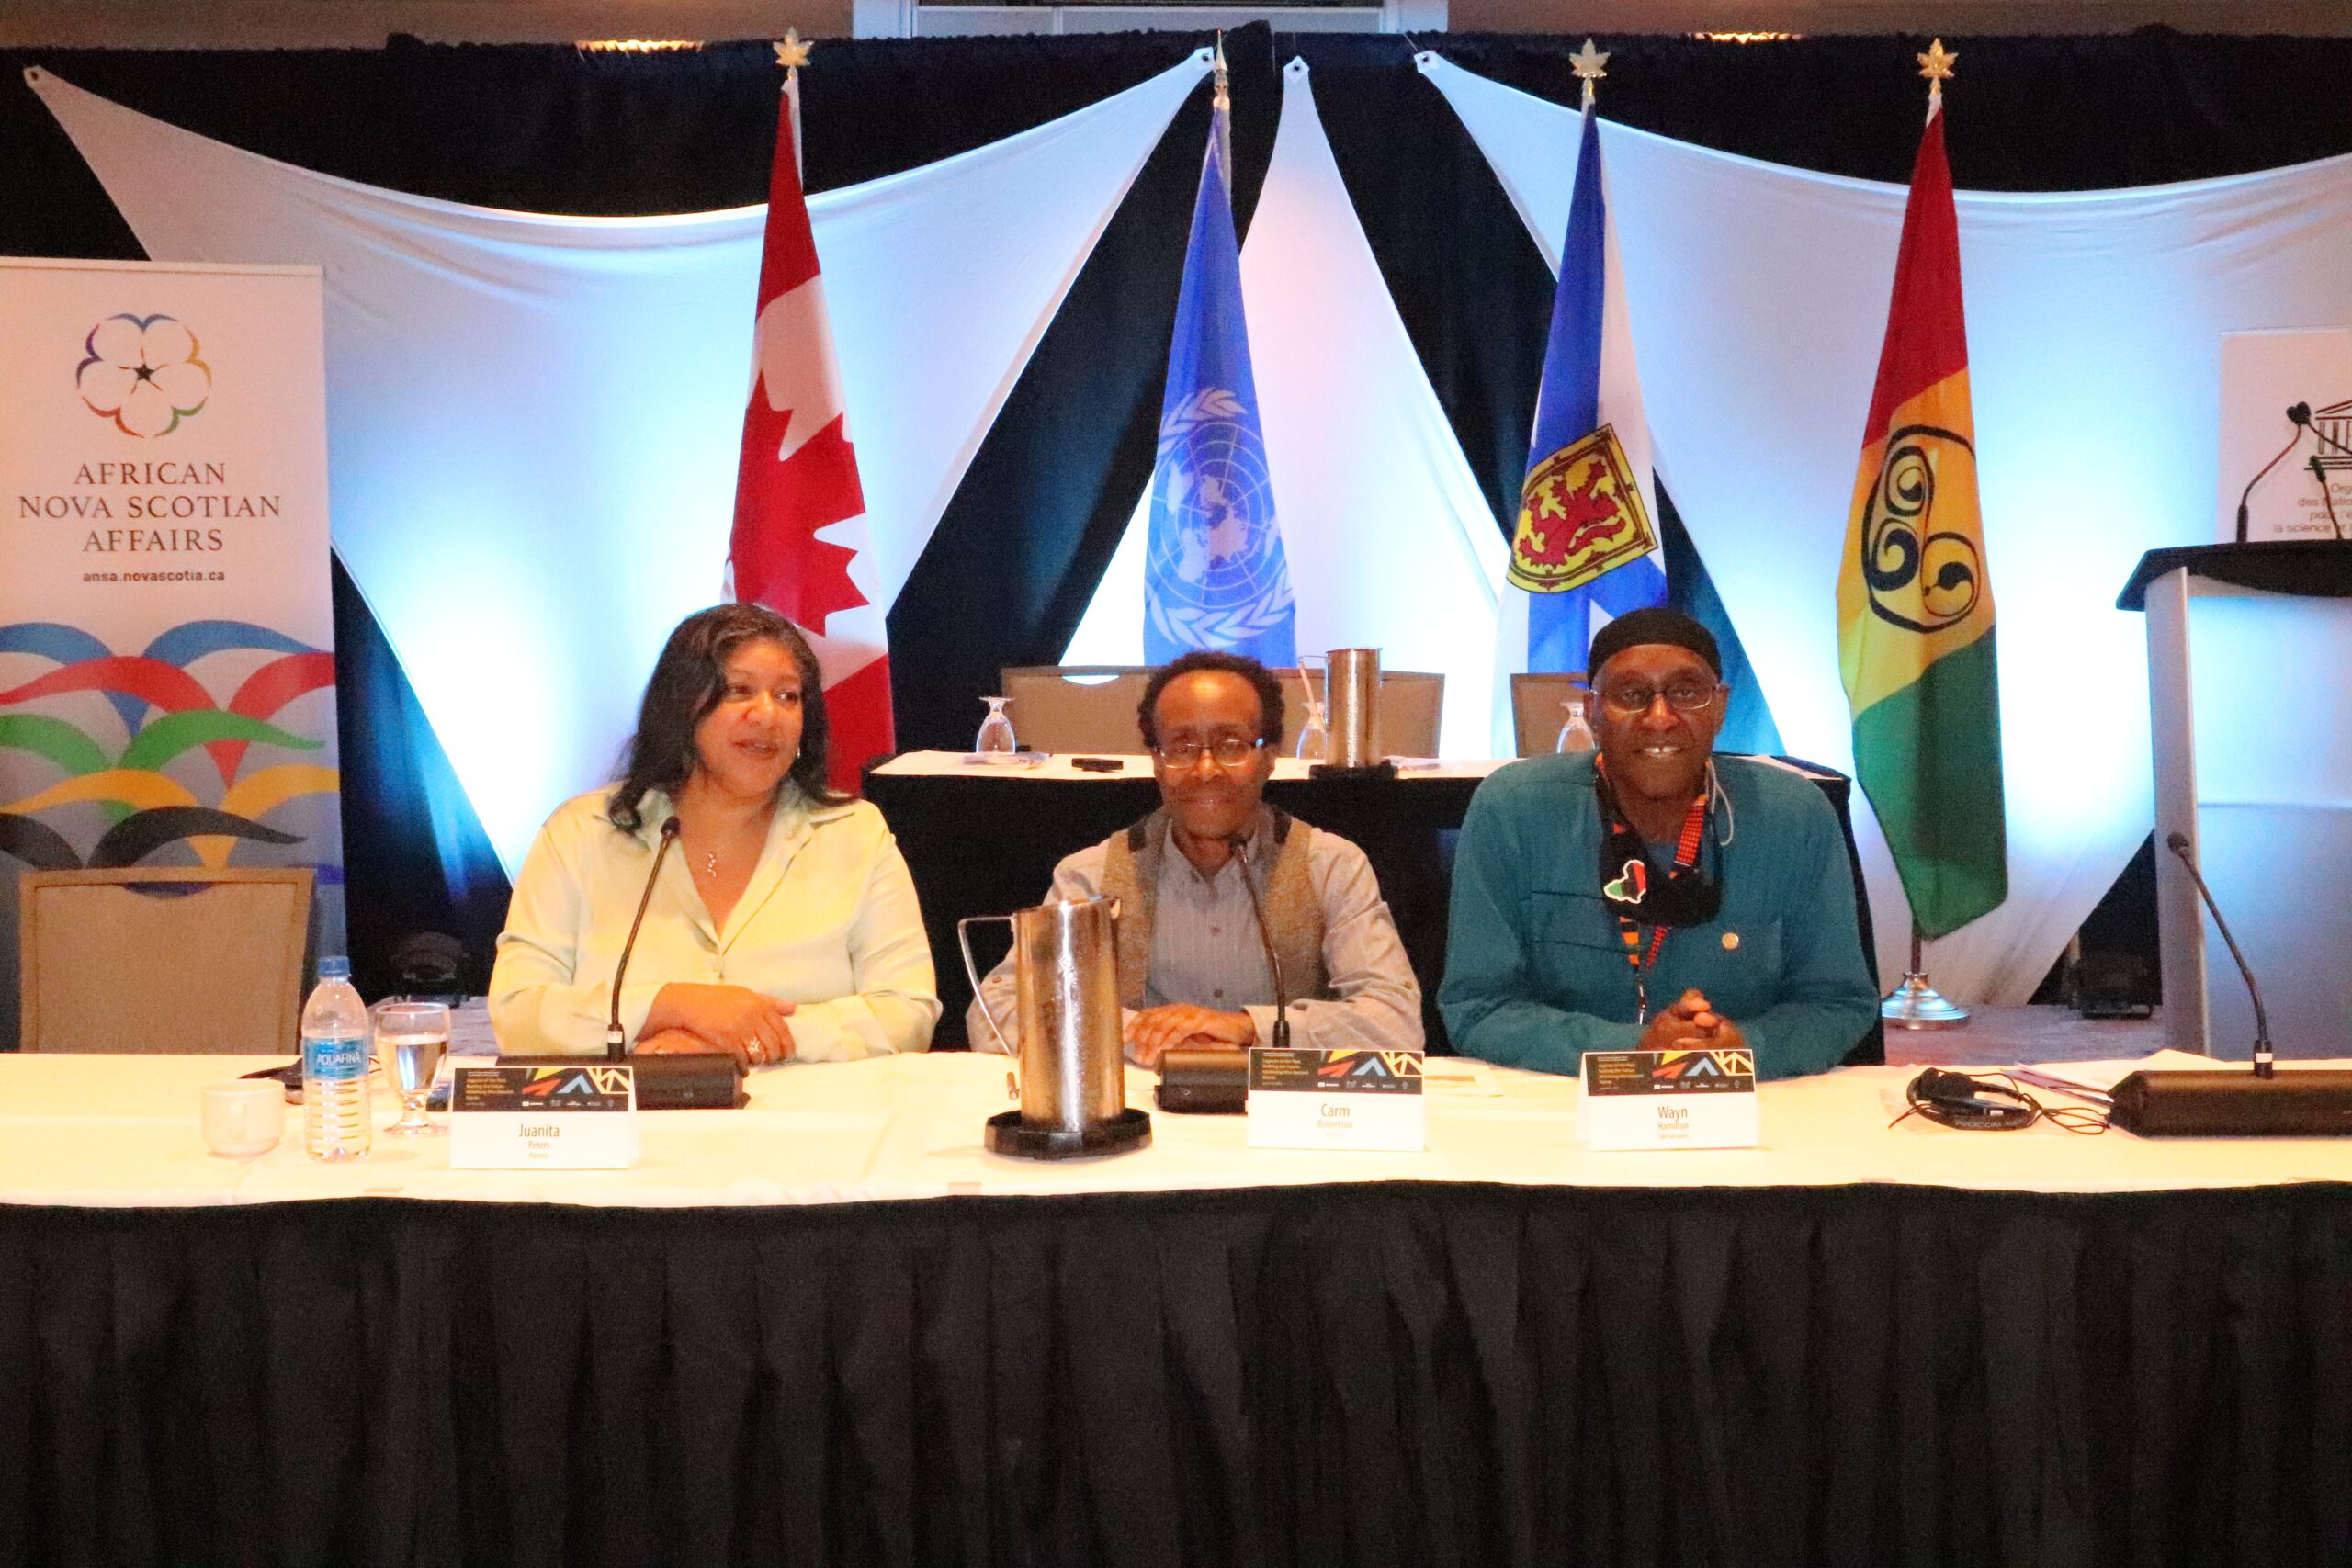 Canadian flag, UN flag, Nova Scotian flag, and African Nova Scotian flag in the background as three Black Nova Scotian sit at table for a panel discussion.